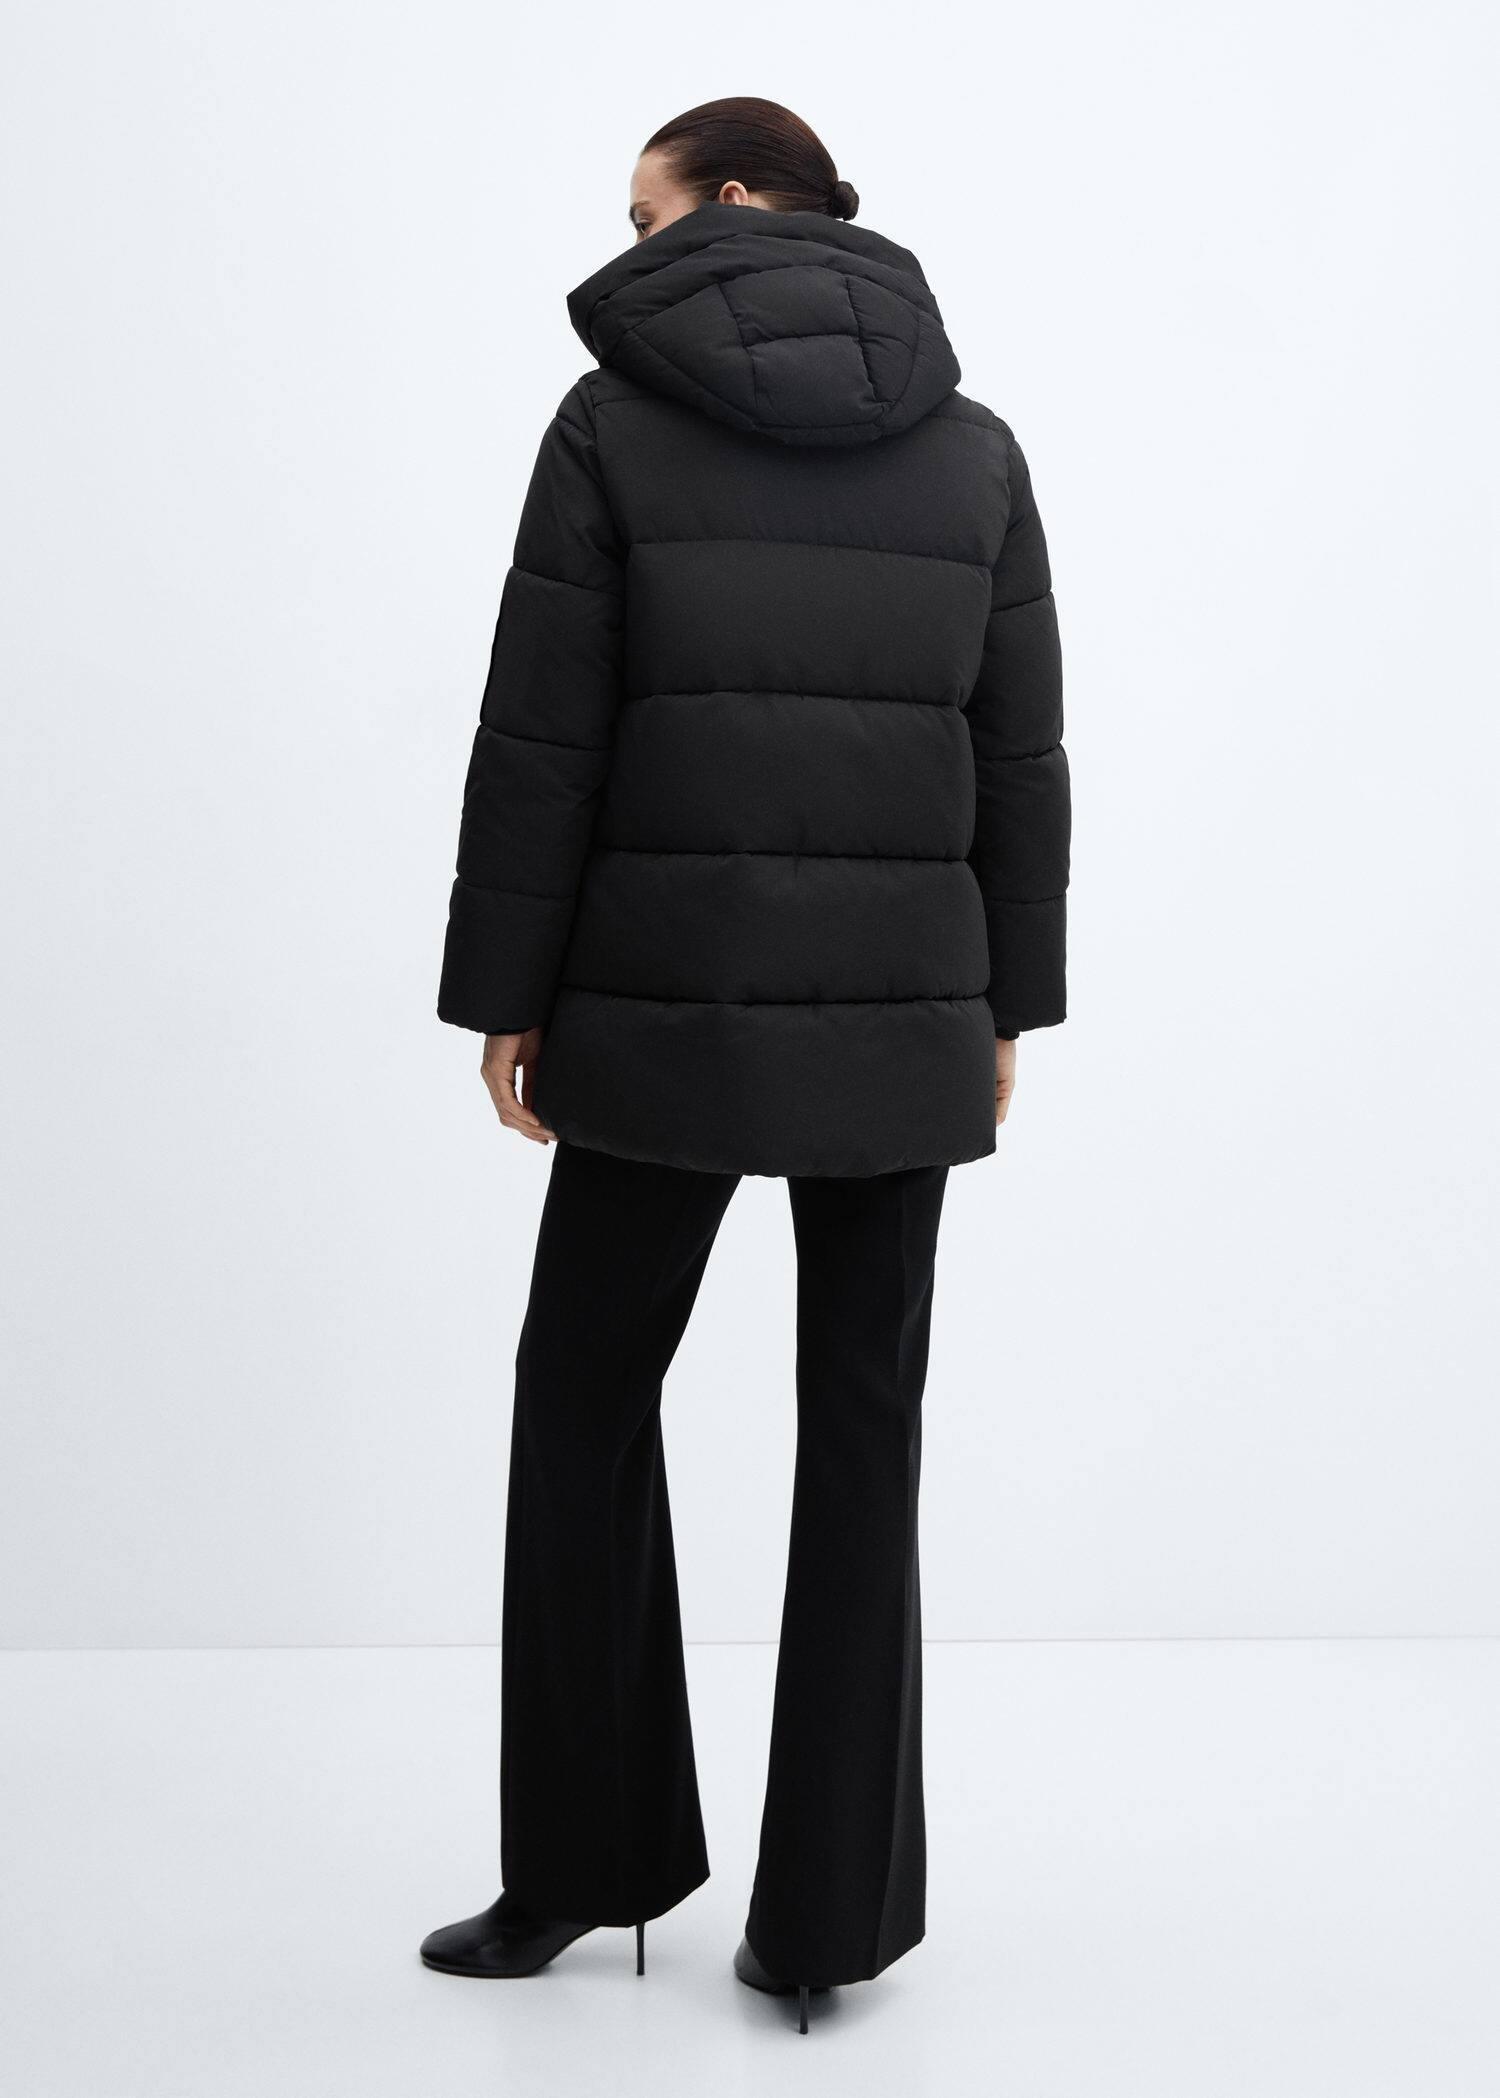 Mango - Black Hooded Quilted Coat